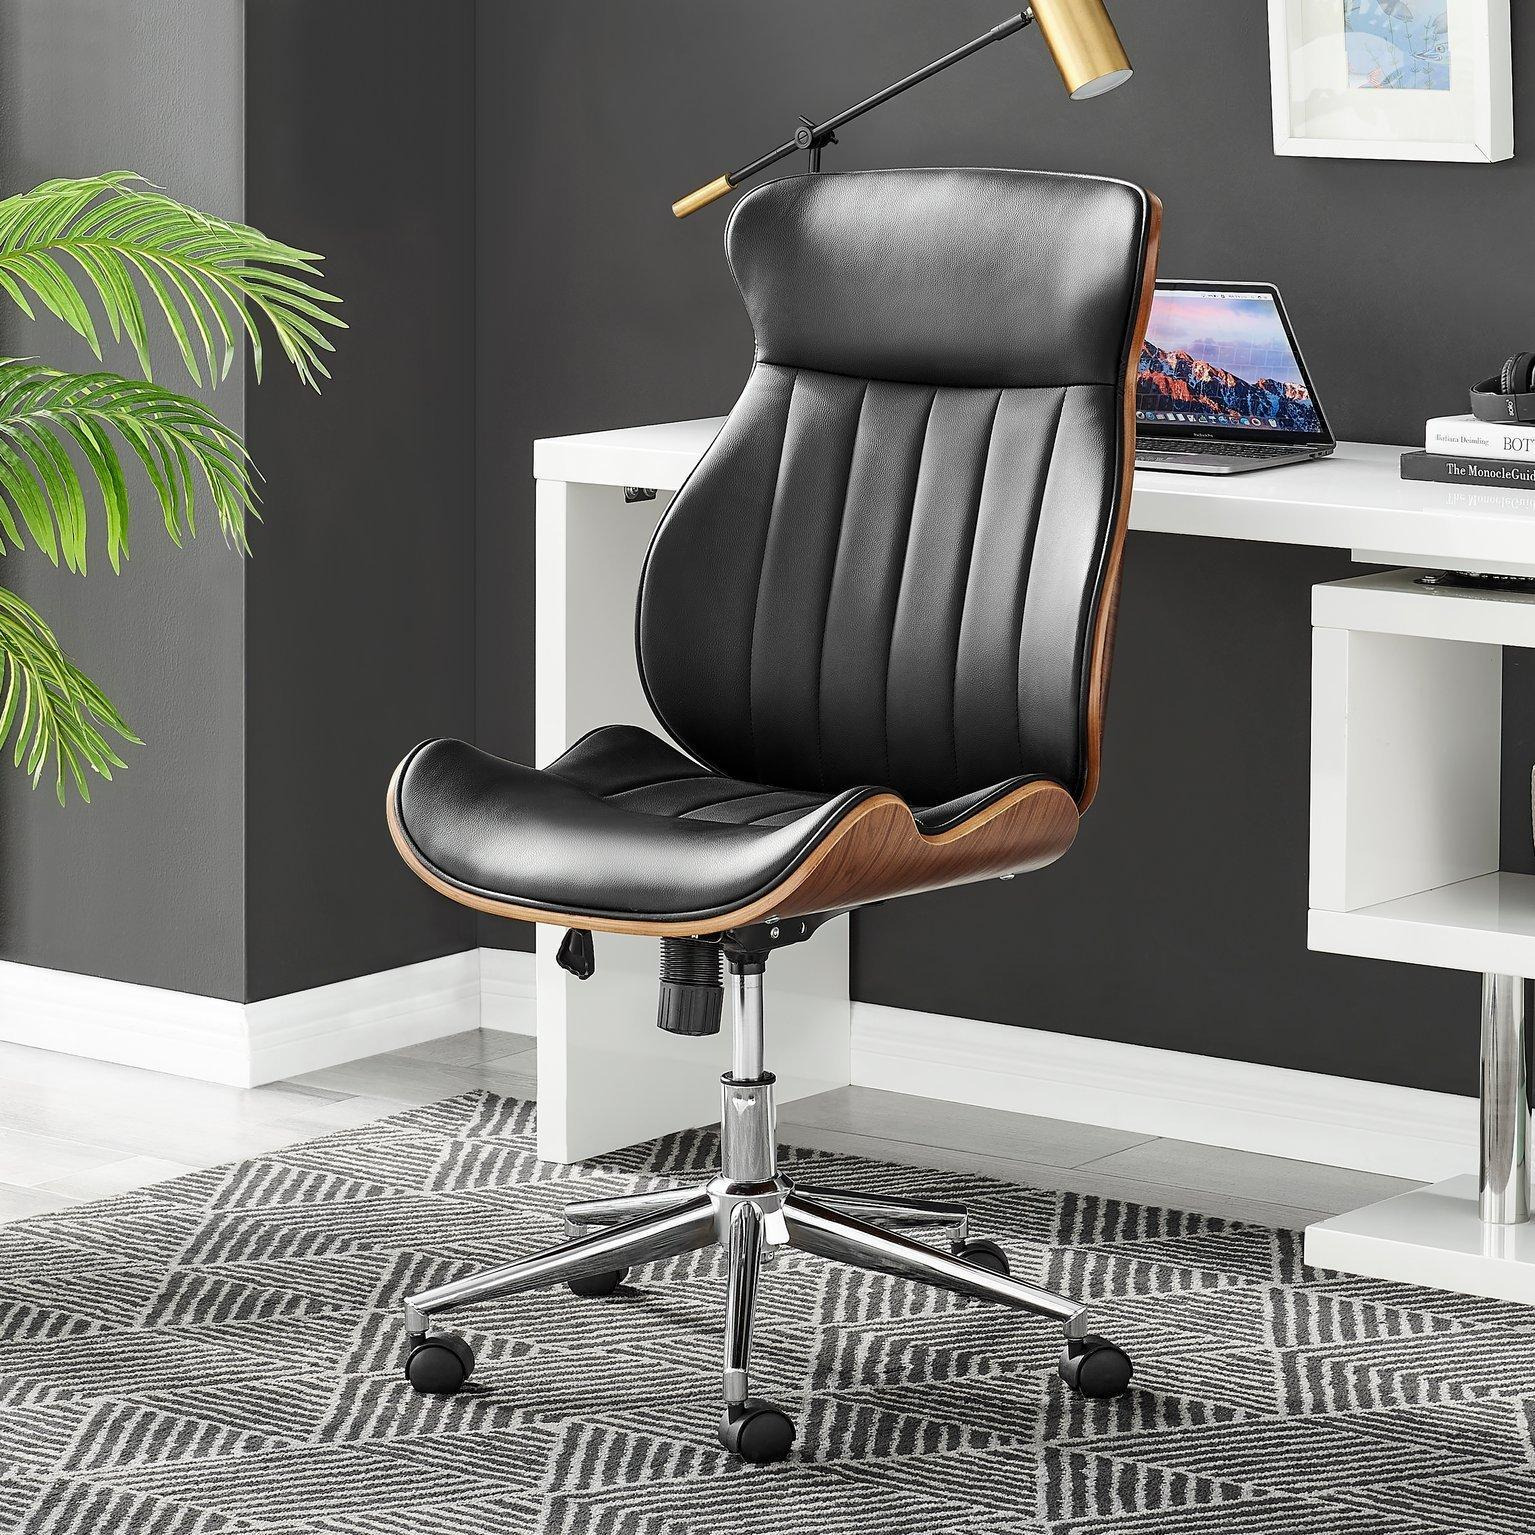 Parker Black Faux Leather Moulded Wooden Back Mid Century Computer Desk Office Gaming Wheeled Adjustable Swivel Chair - image 1